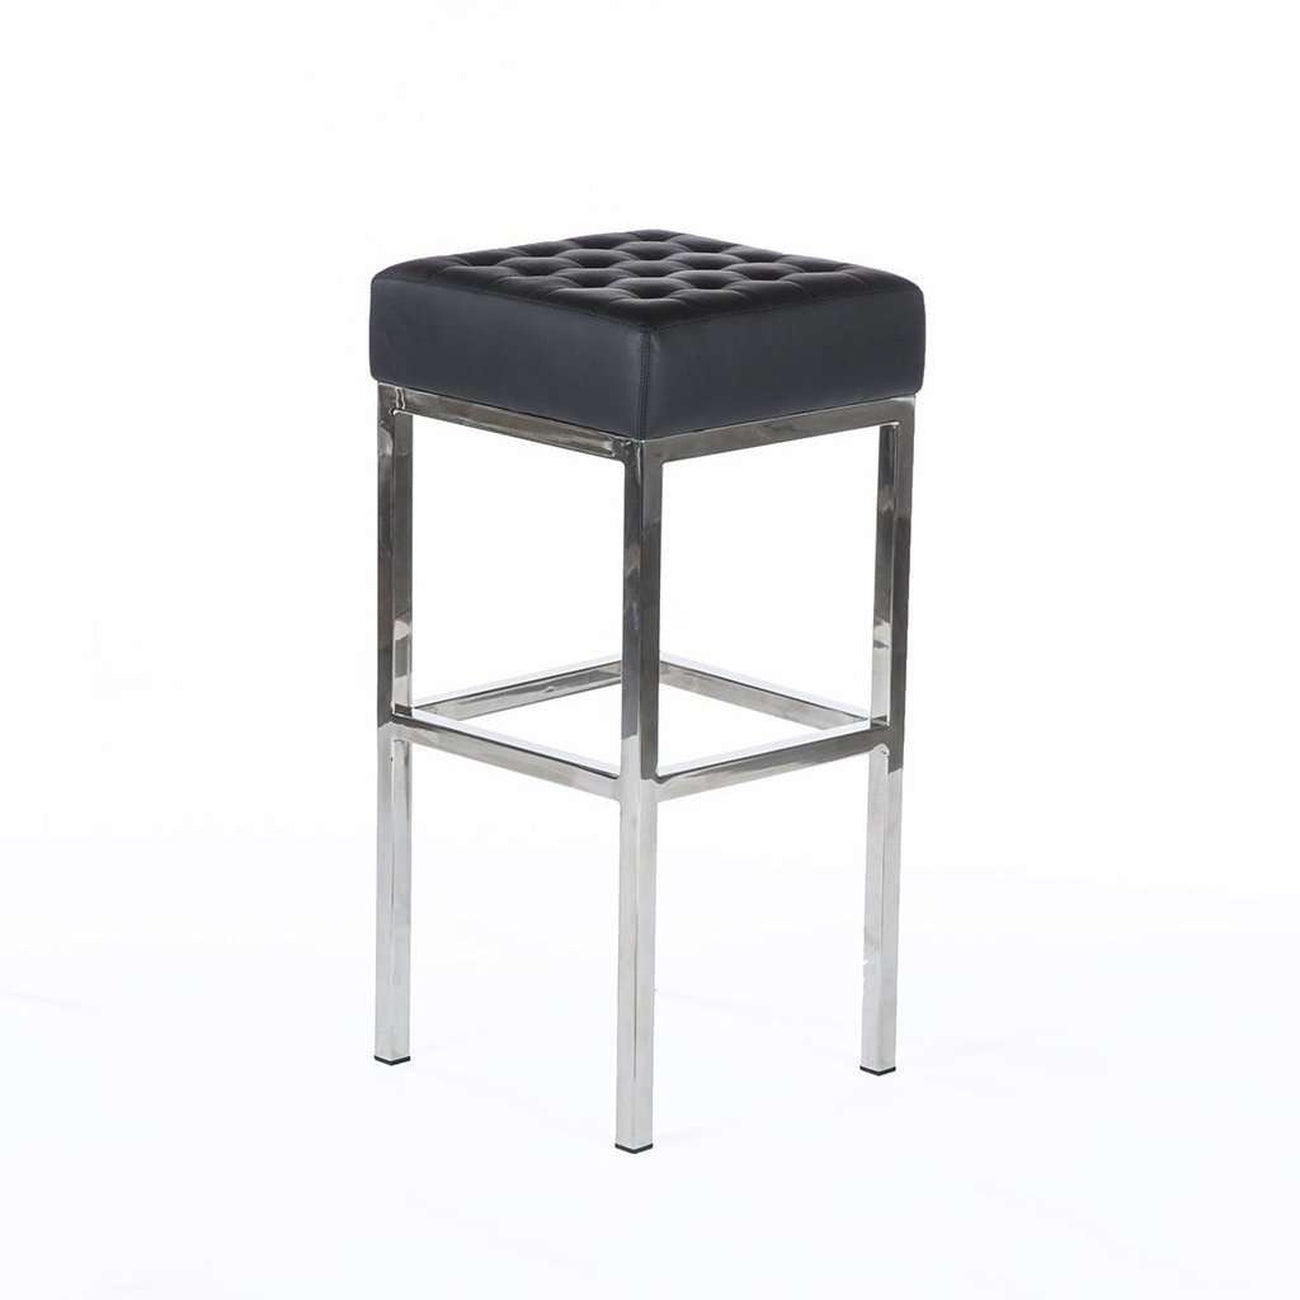 Mid-Century Modern Vadso Bar Stool - Black Tufted Leather